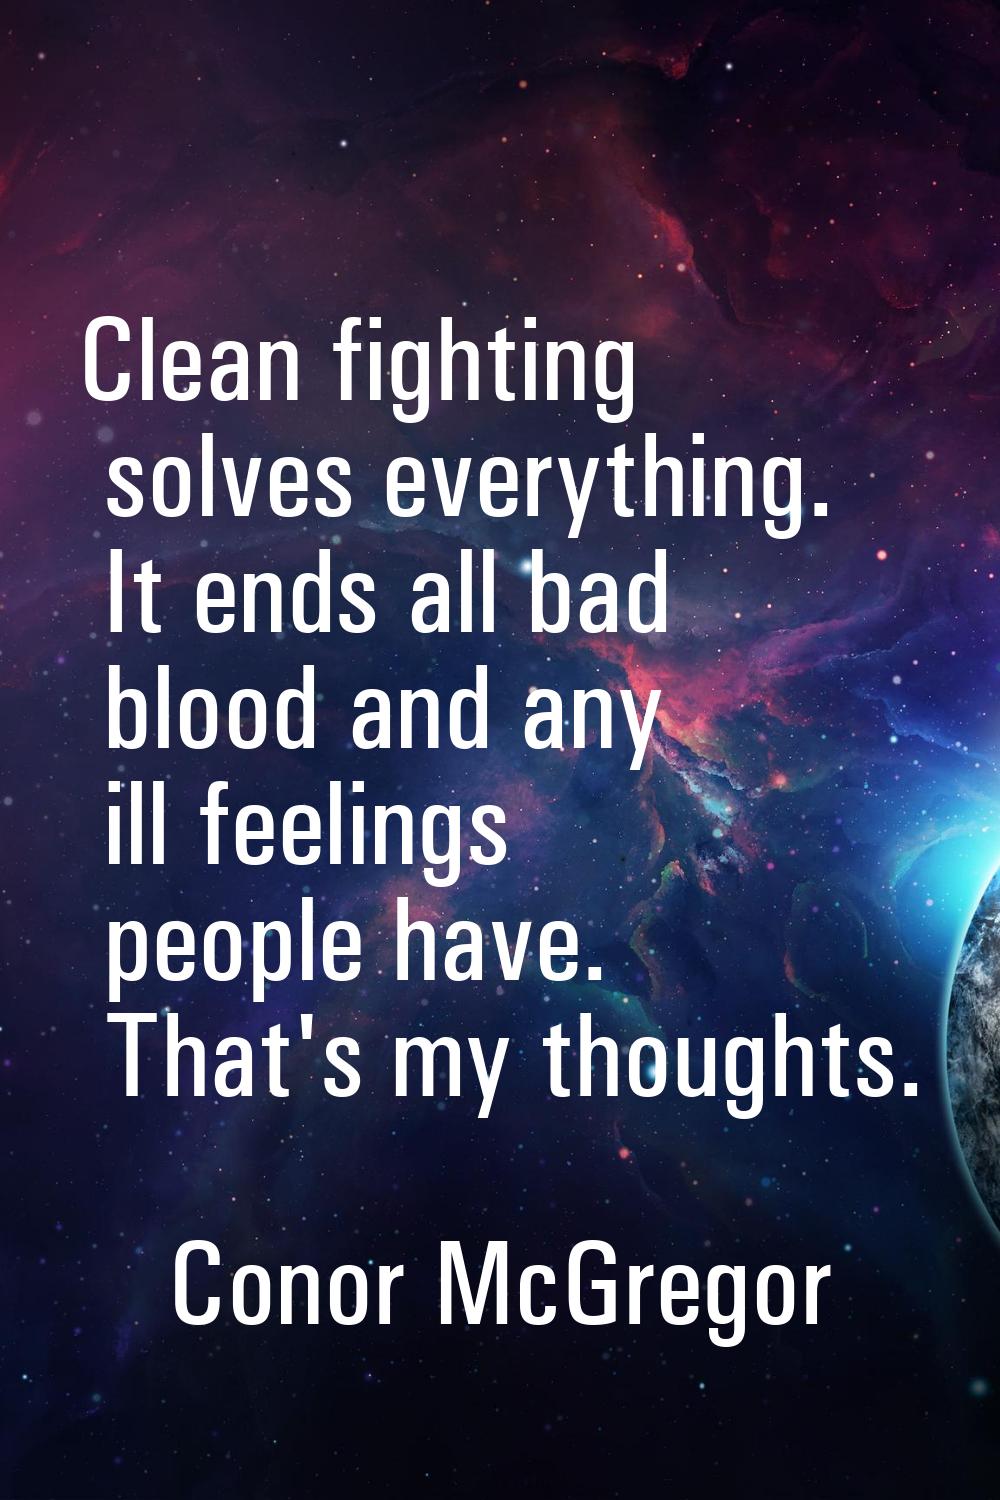 Clean fighting solves everything. It ends all bad blood and any ill feelings people have. That's my